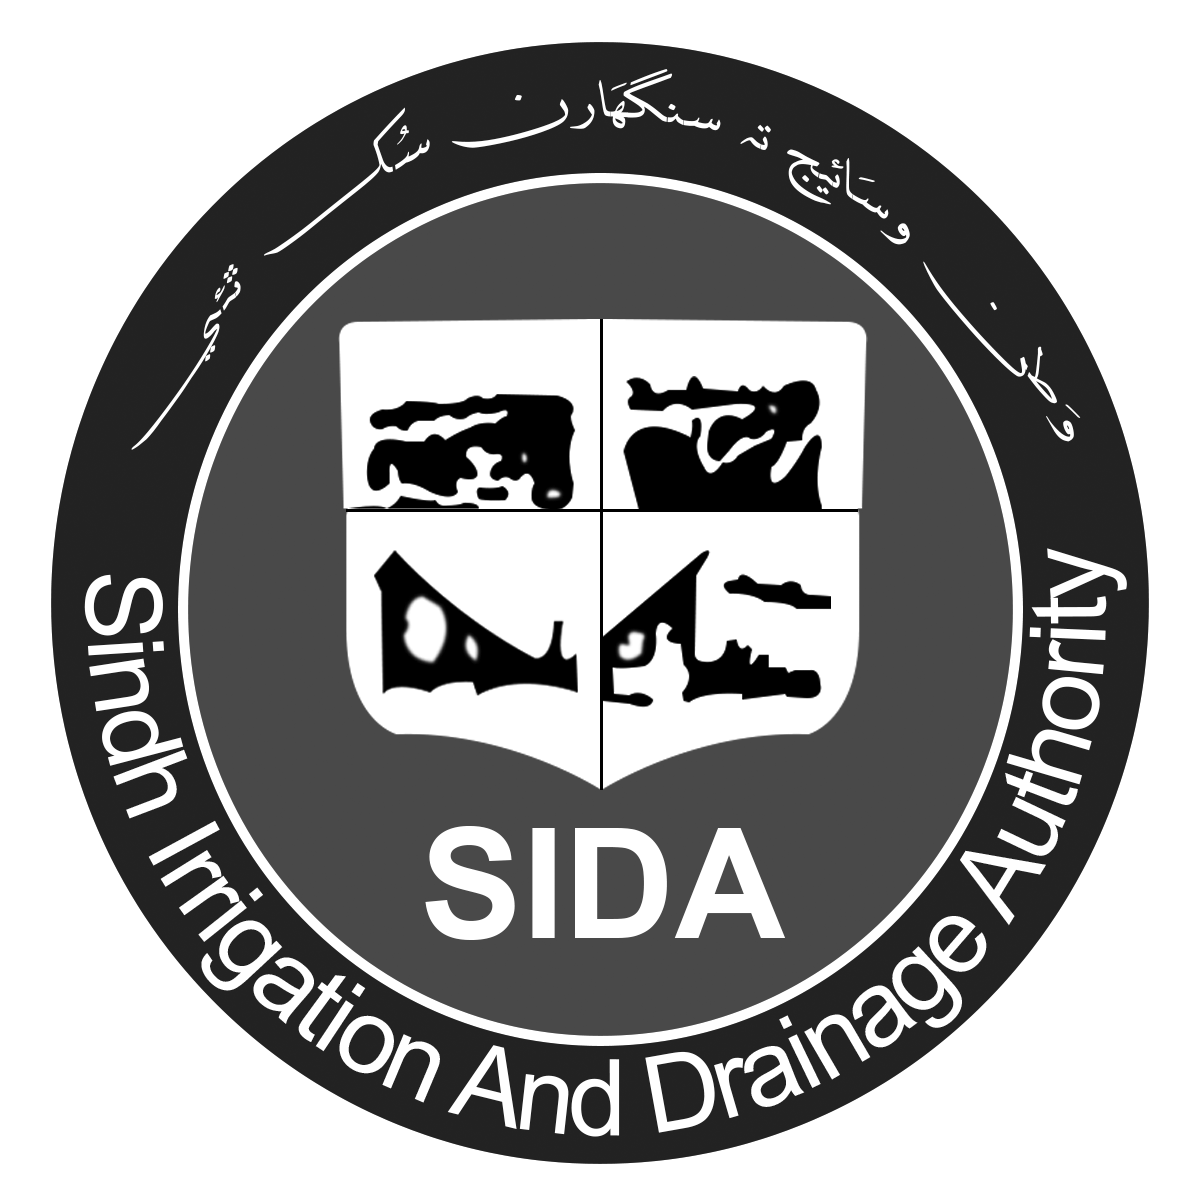 Sindh Irrigation & Drainage Authority Tenders